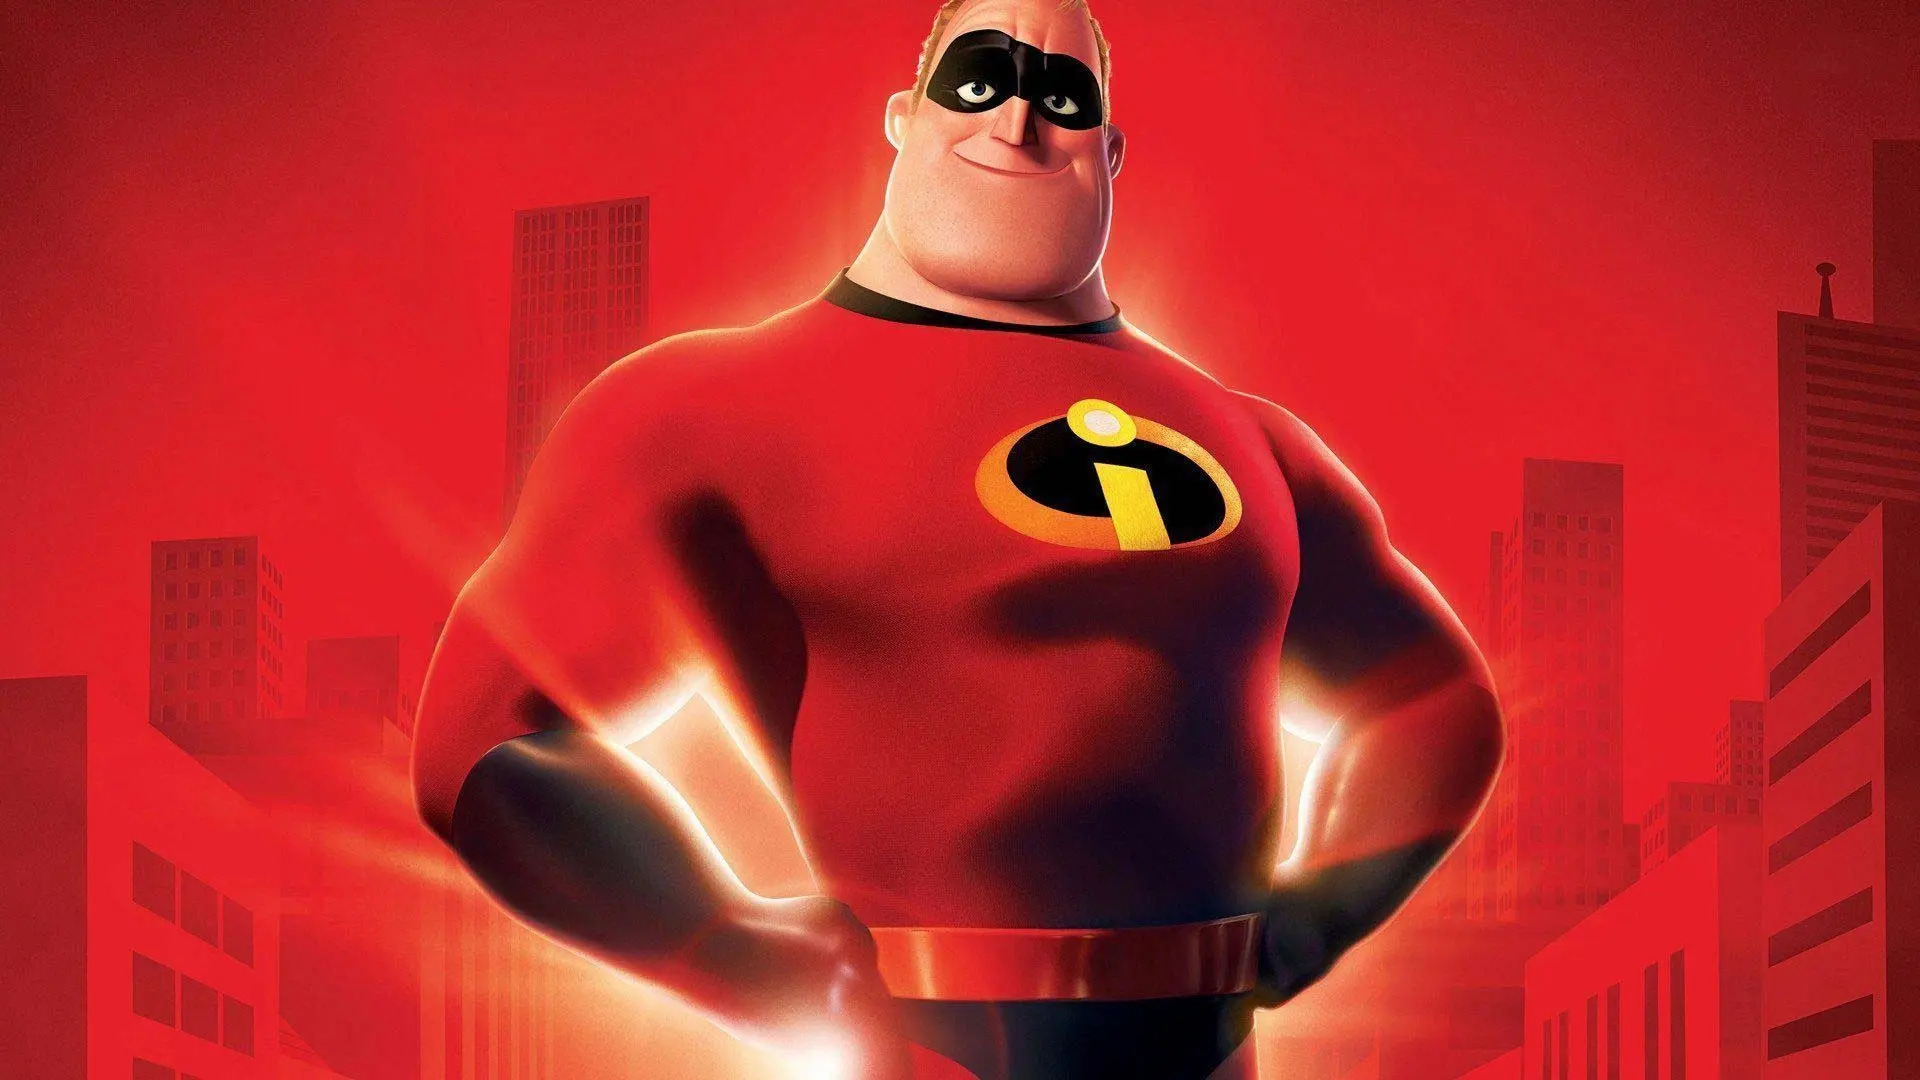 the-incredibles-strong-super-hero-in-red_18_11zon